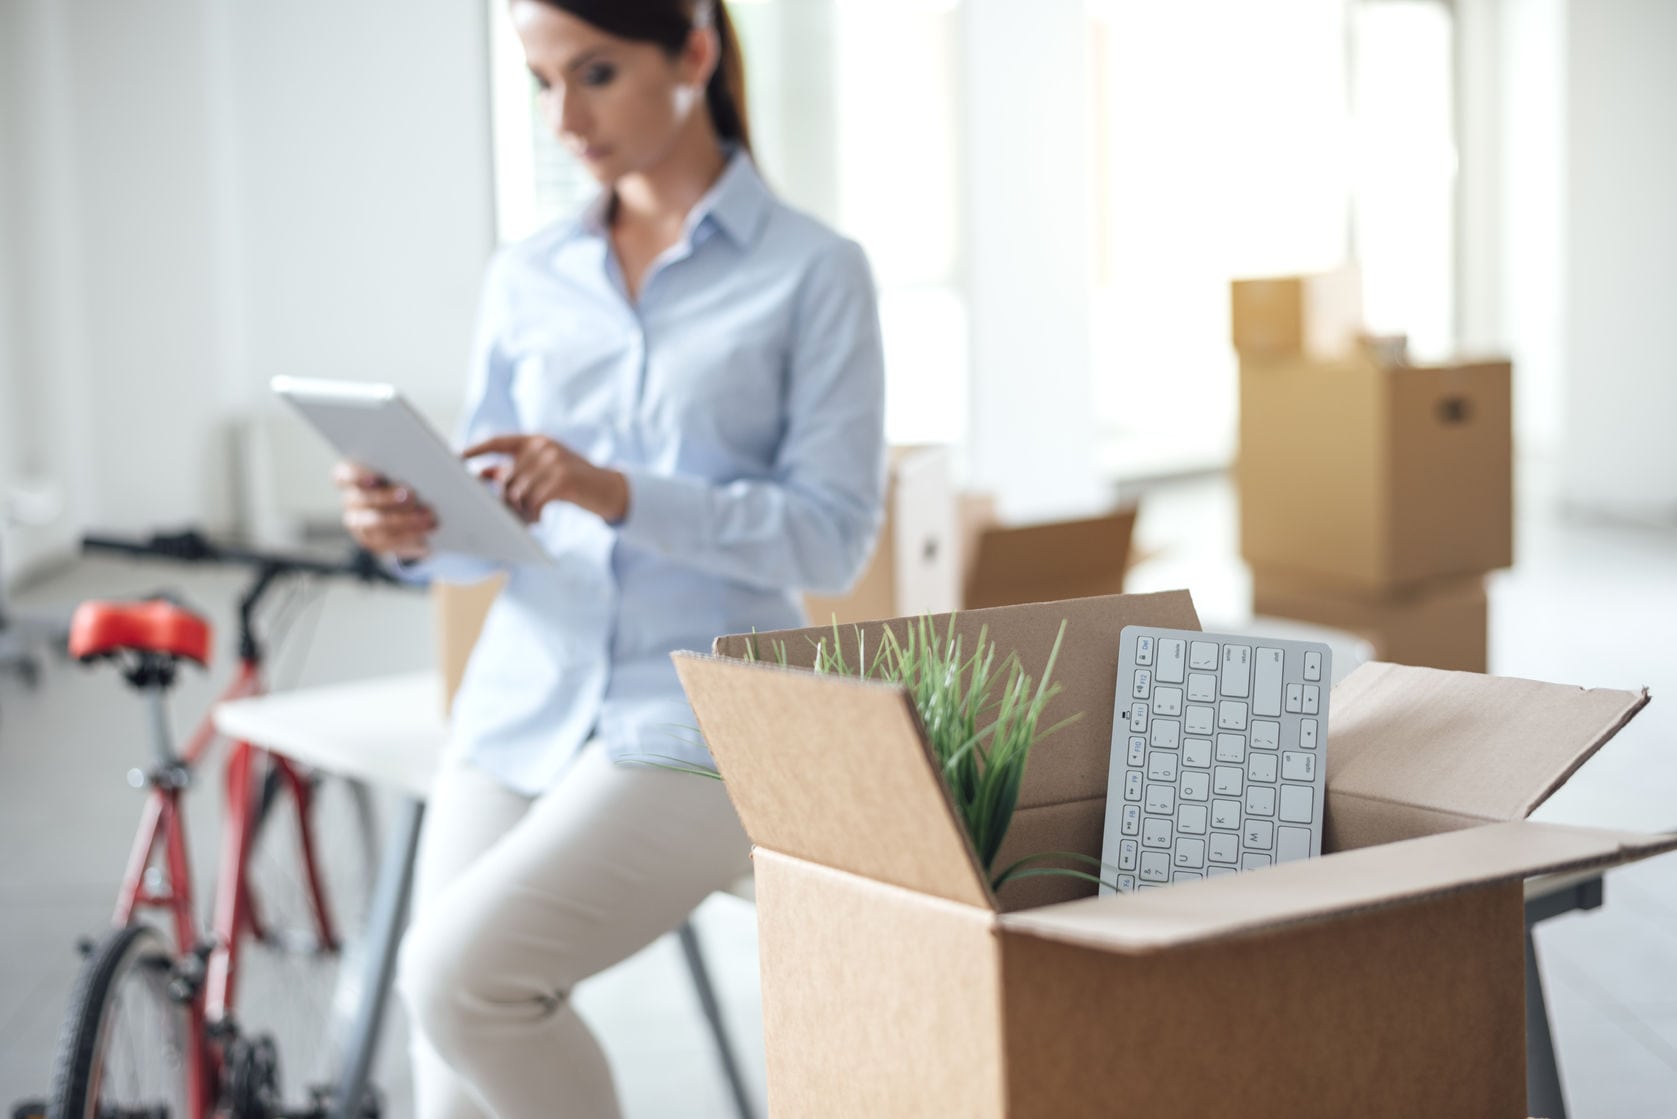 Choosing an Office Moving Company